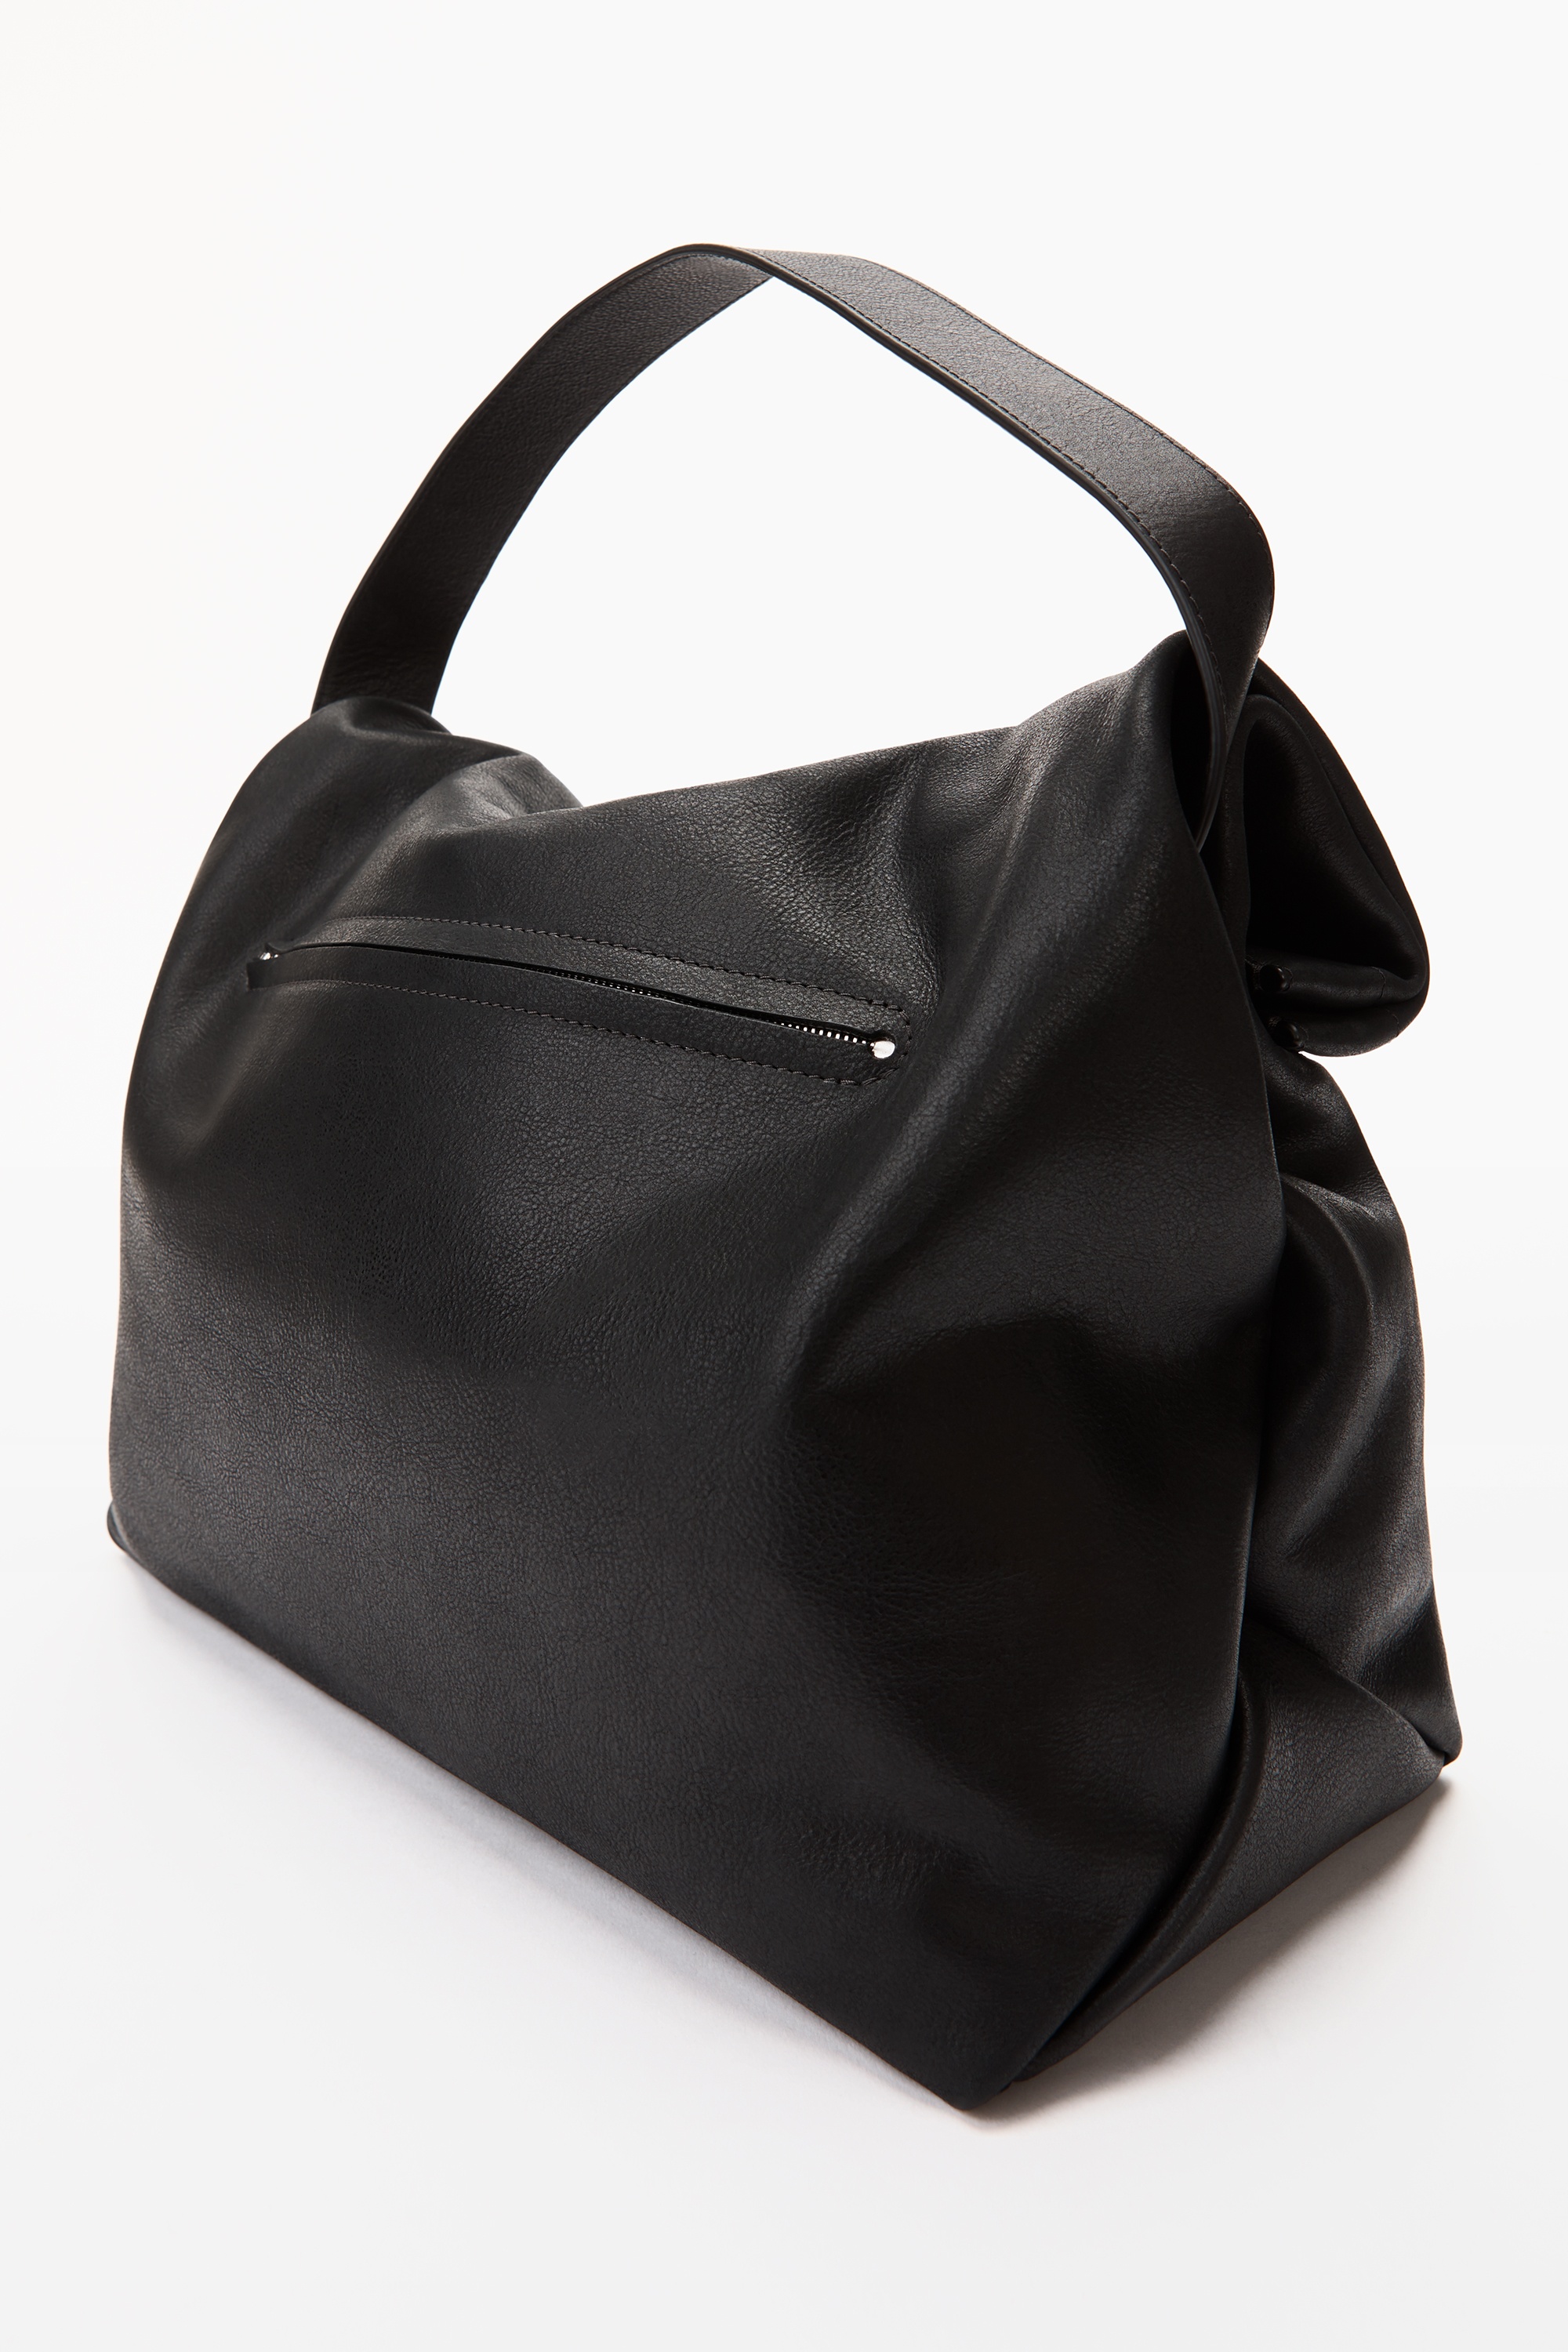 LARGE LUNCH BAG IN WAXED LEATHER - 5